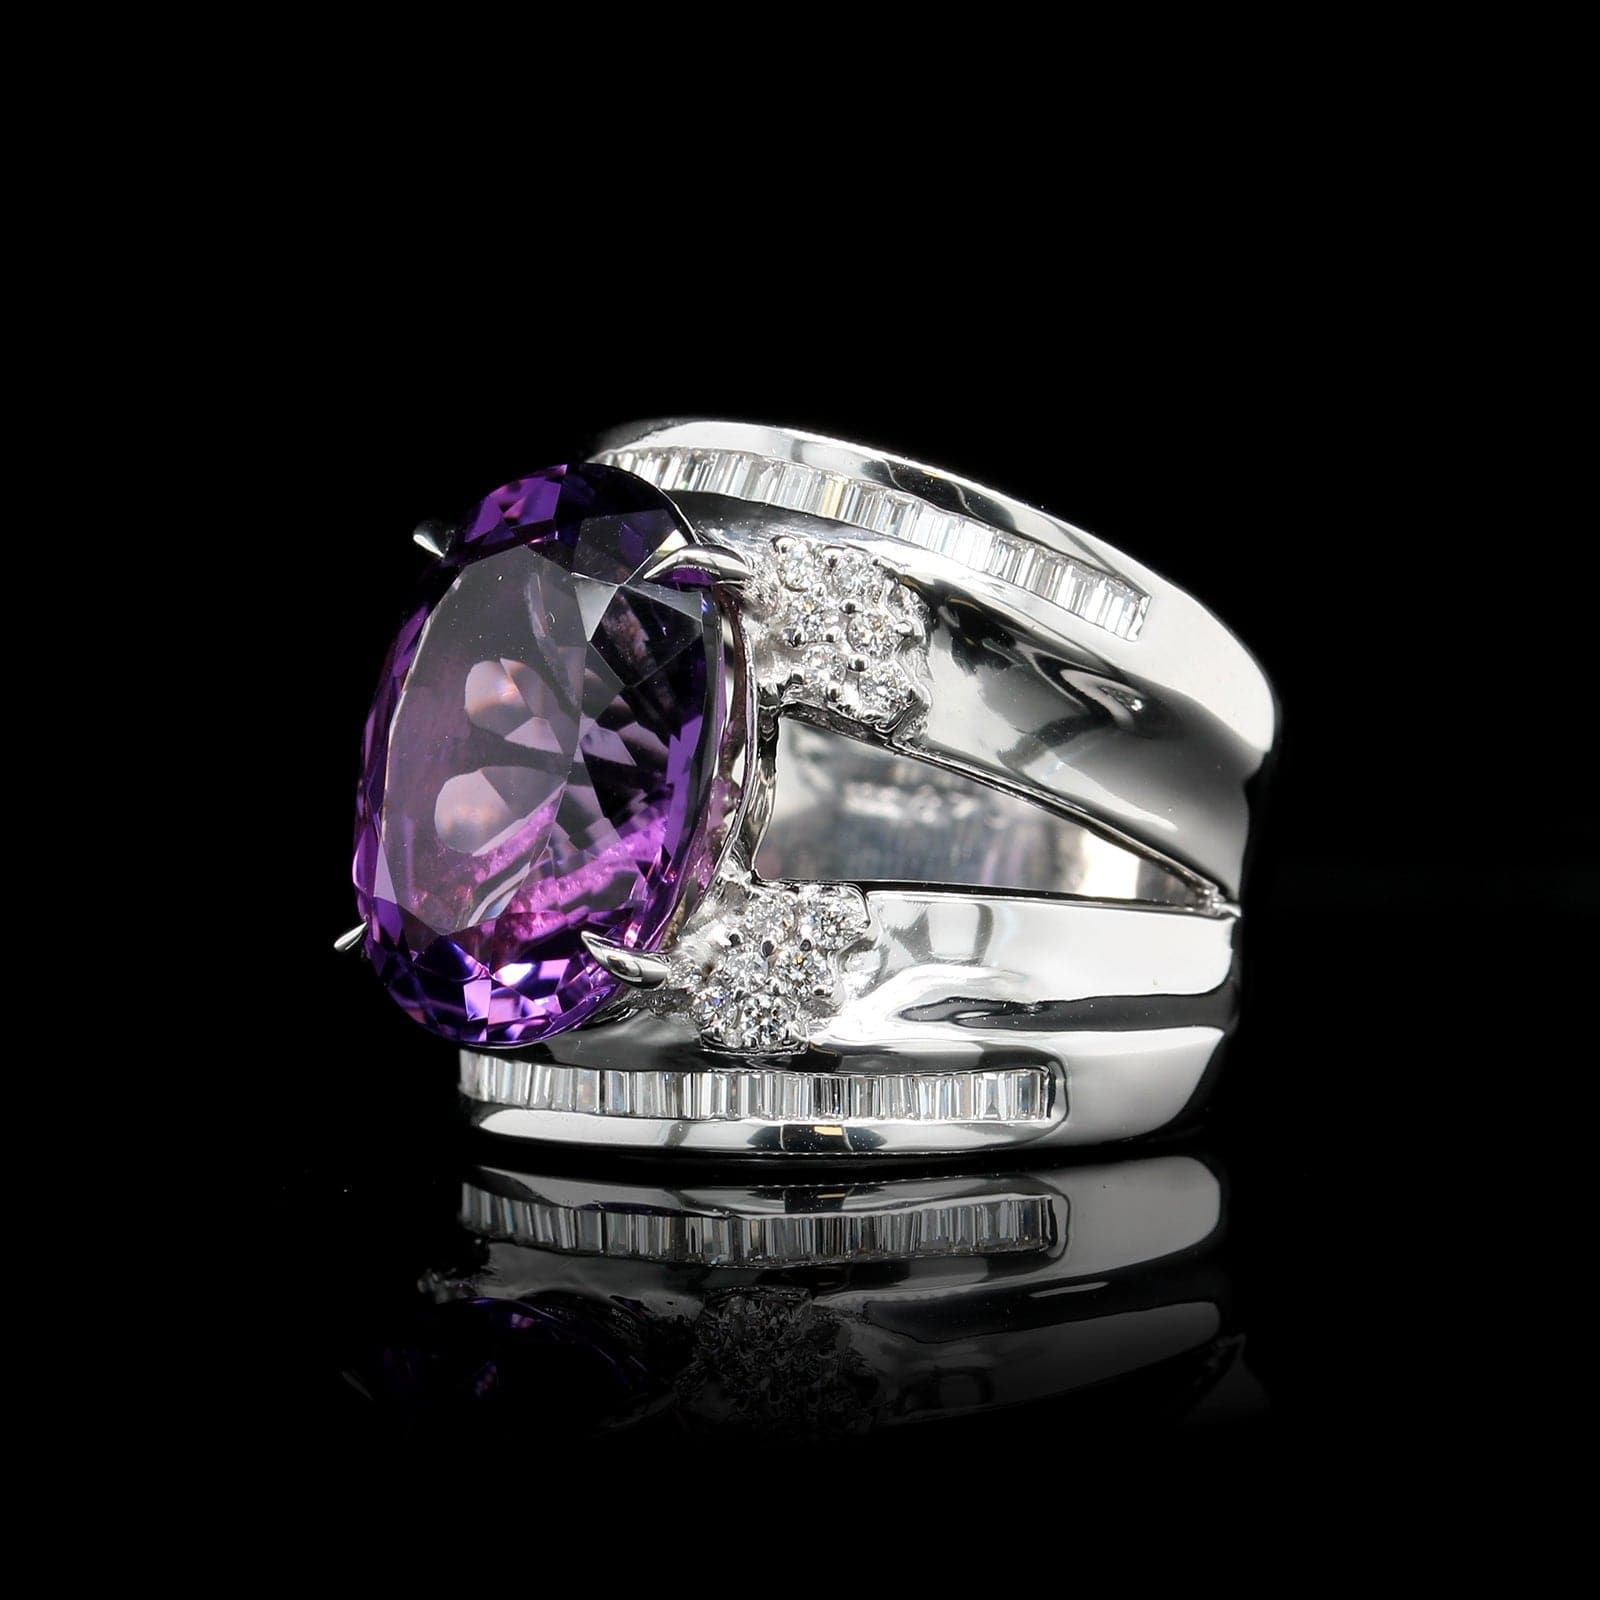 18K White Gold Estate Amethyst and Diamond Ring, White gold, Long's Jewelers